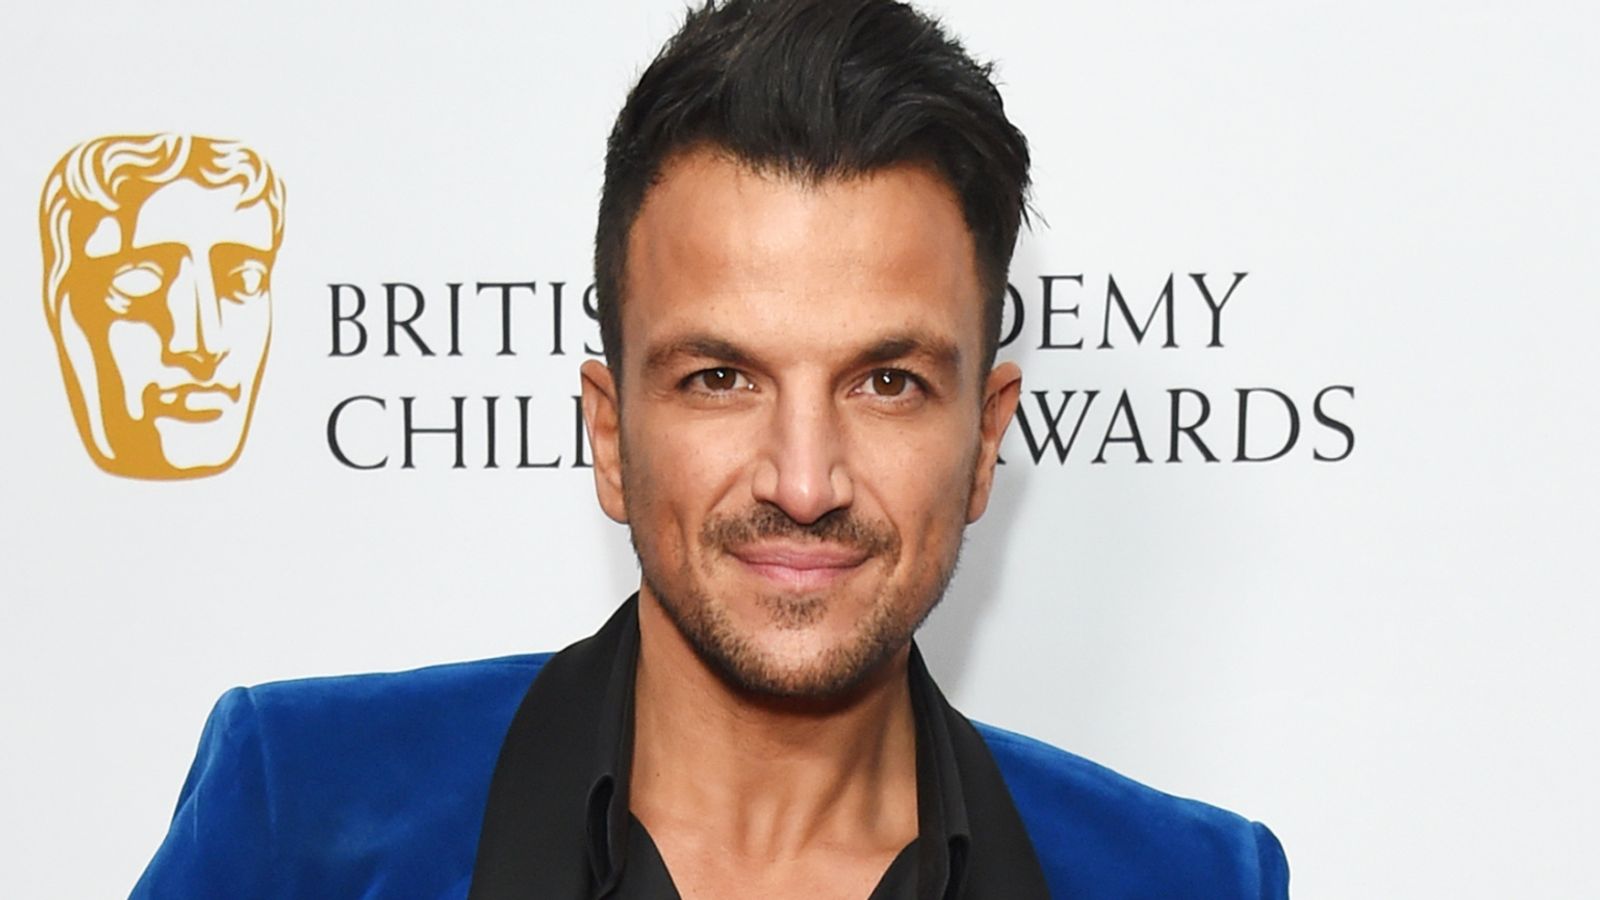 Peter Andre denies refusing to touch fans over coronavirus fears | Ents ...